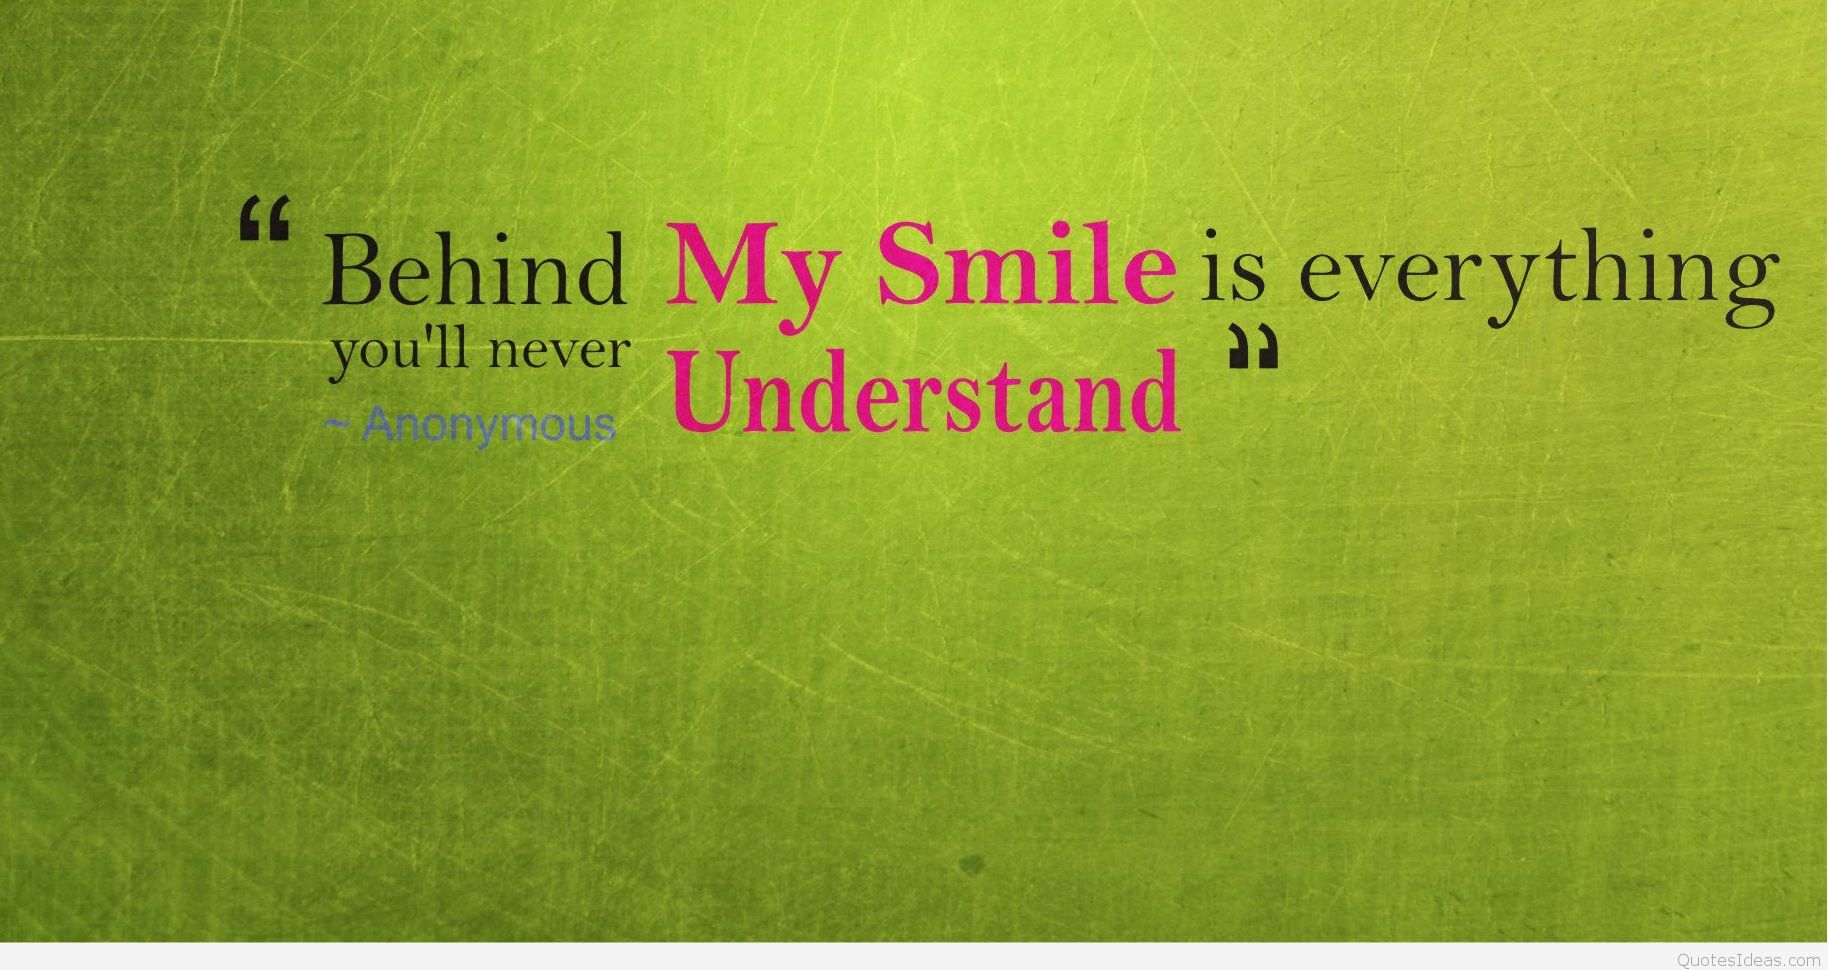 Behind my smile   sad quote on wallpaper